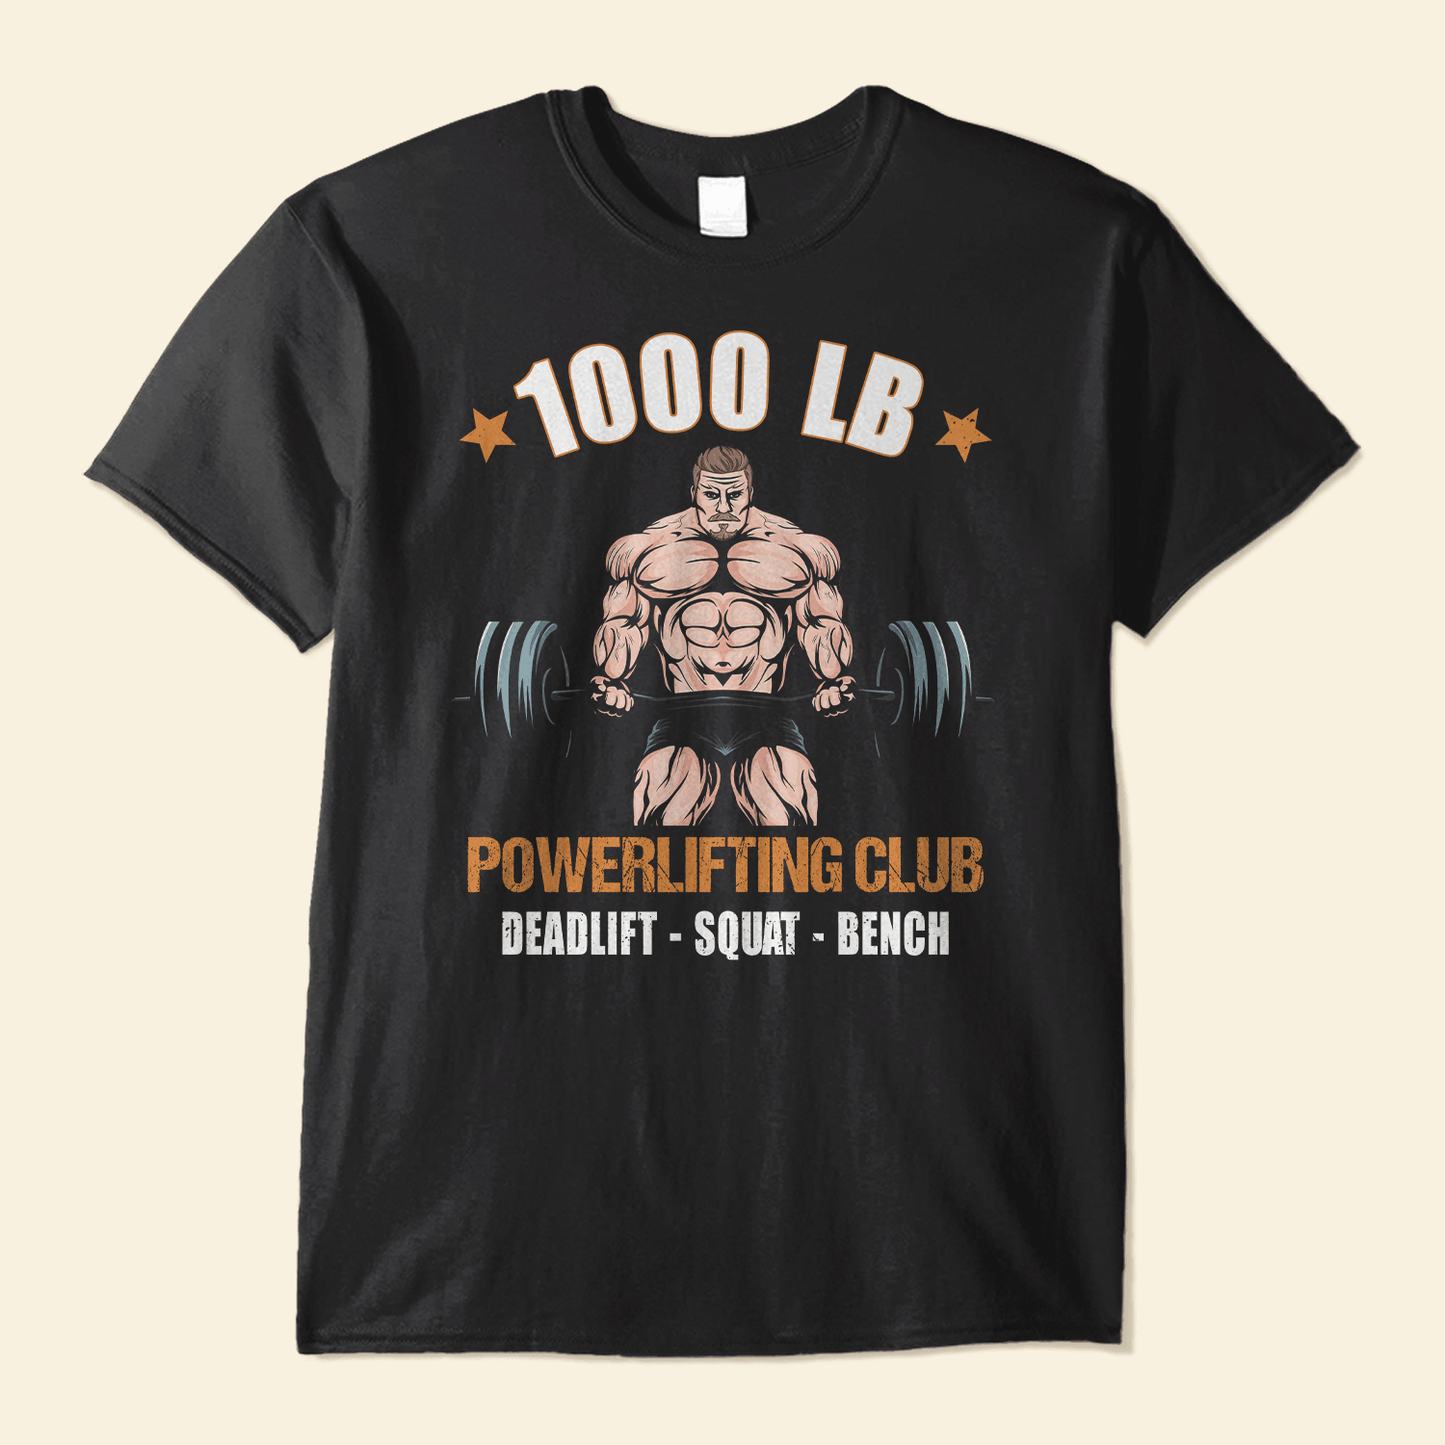 1000 LB Club - Personalized Shirt - Birthday Gift For Powerlifting Lovers